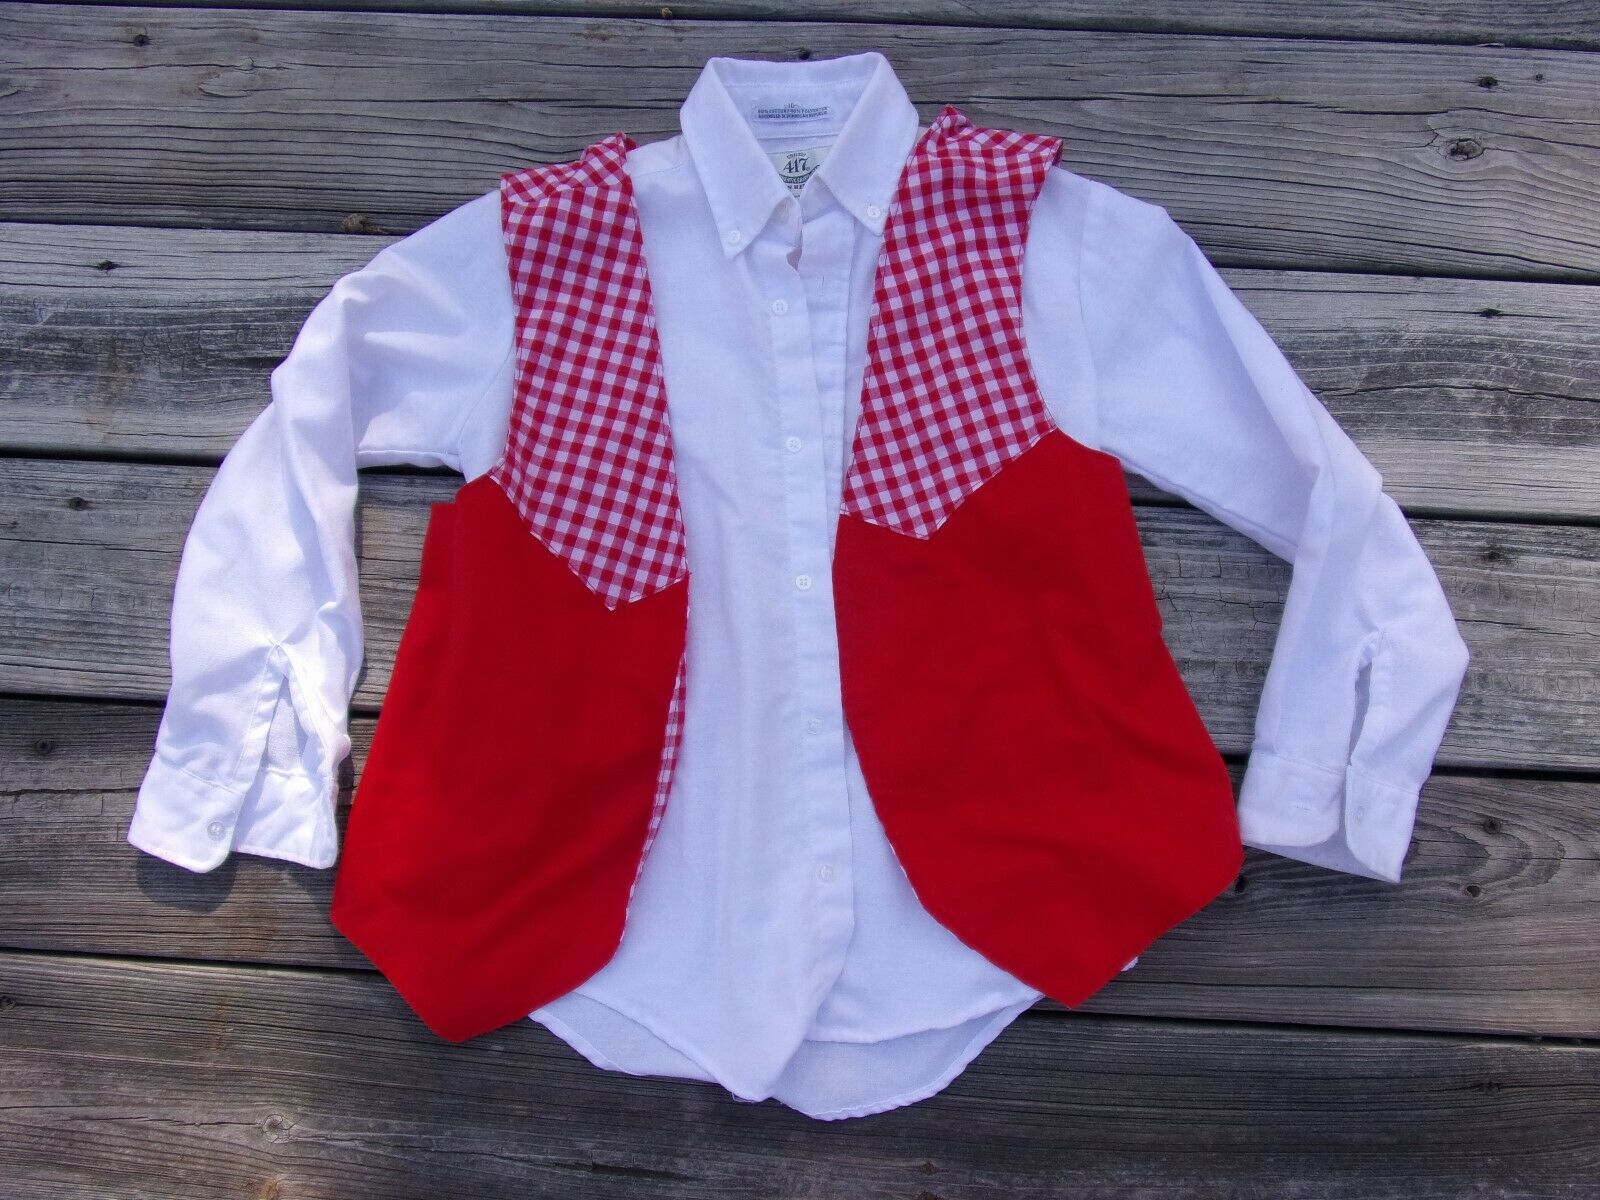 Boy's Shirt Vest Country Square Dance Costume Red White